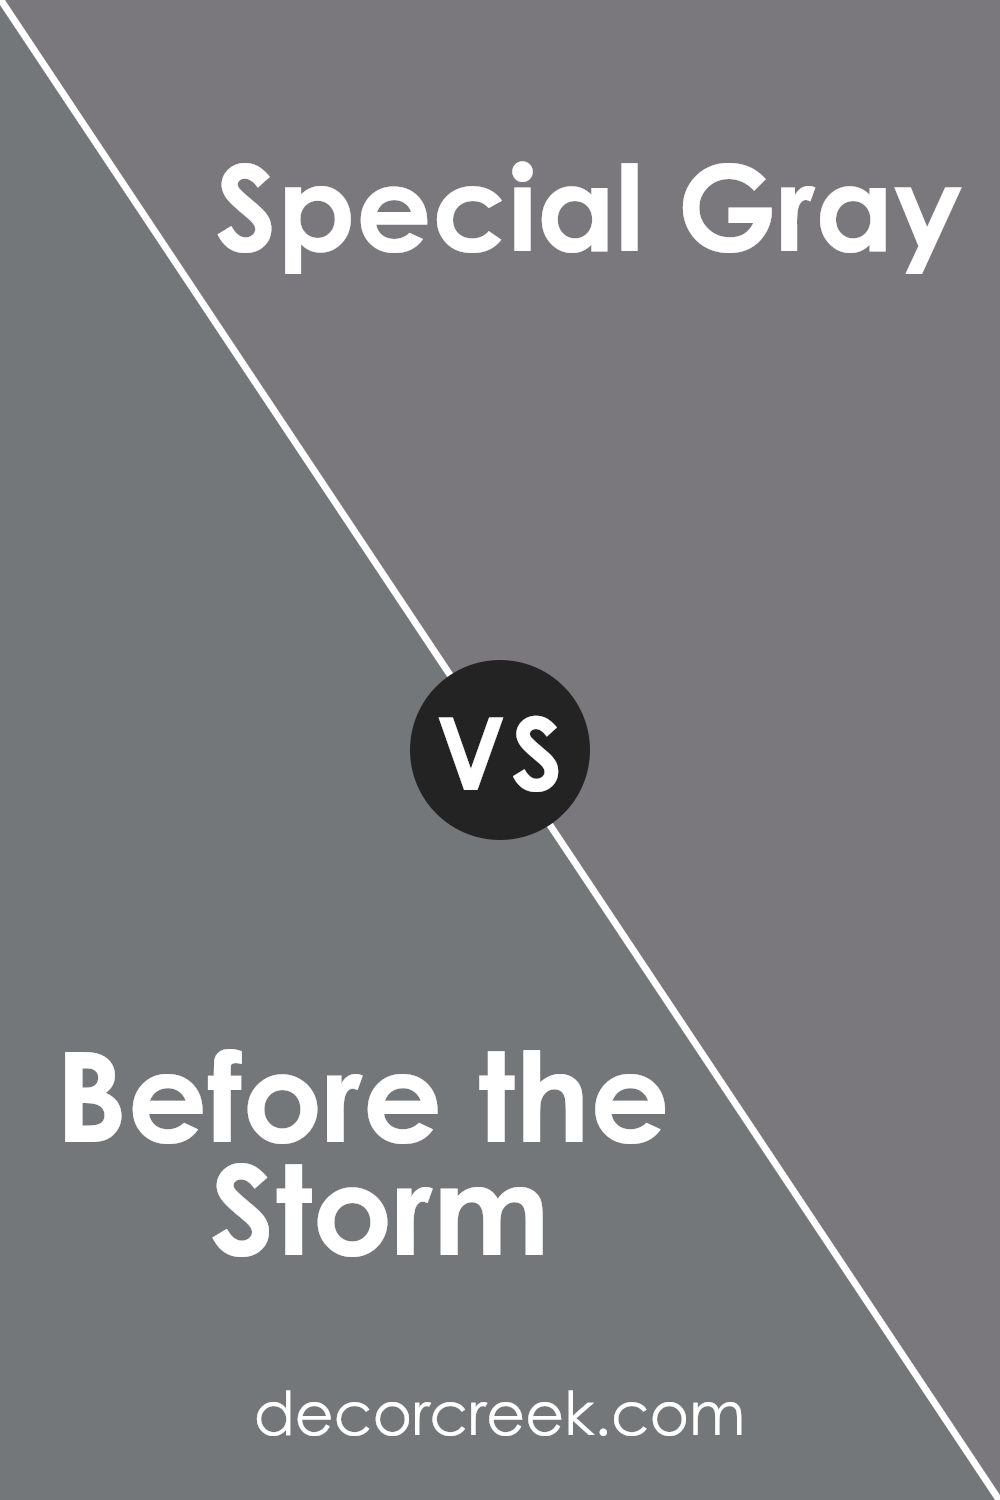 before_the_storm_sw_9564_vs_special_gray_sw_6277